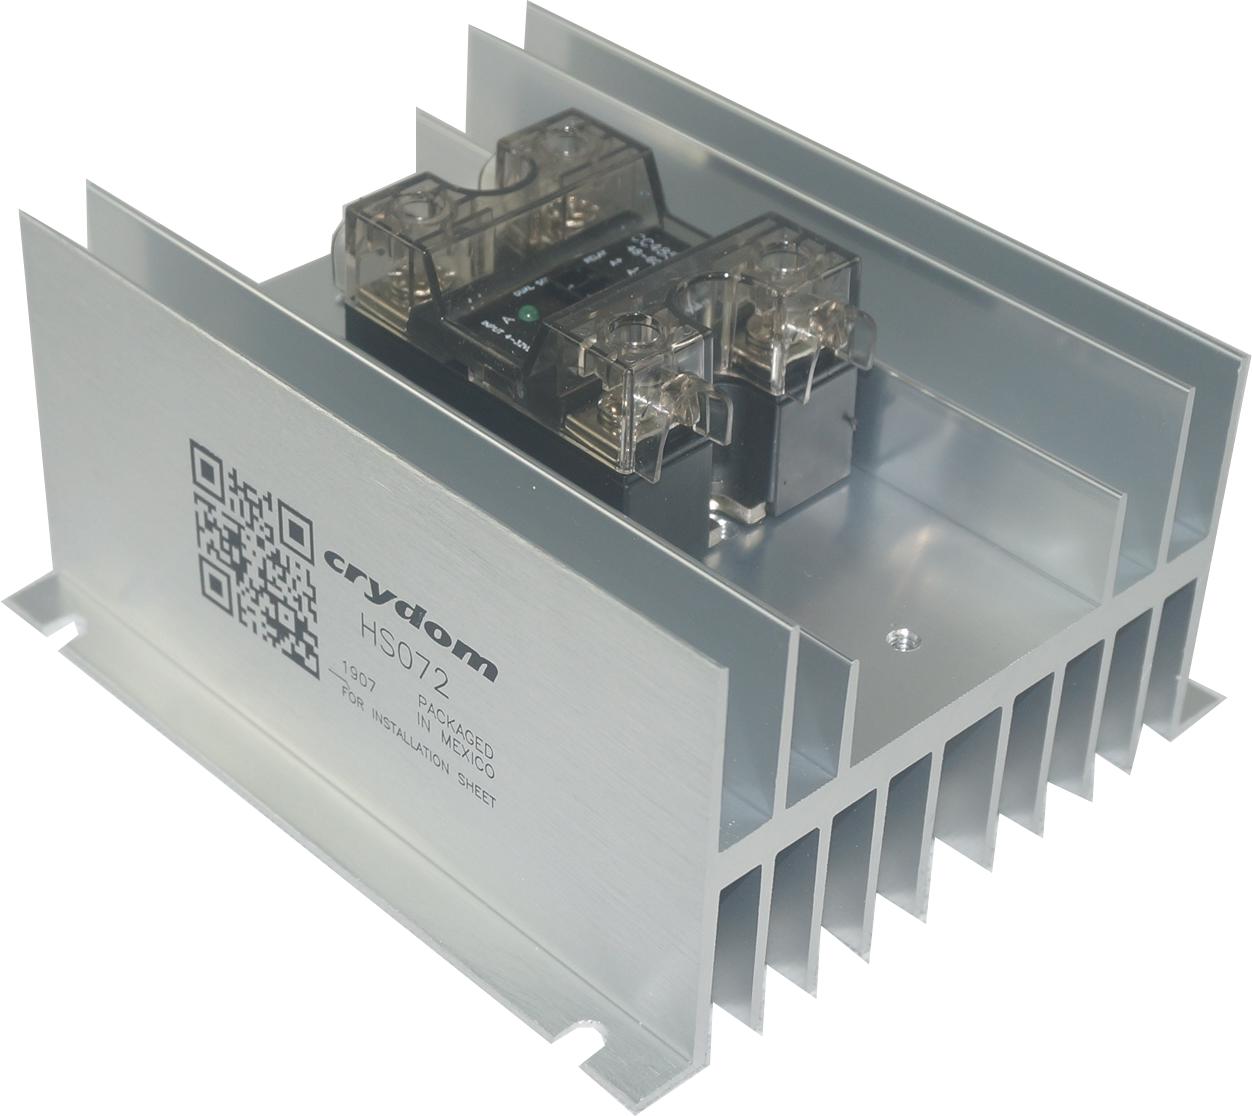 HS072 + CC4850W3VH, Dual Solid State Relay, with Panel Mount Heatsink, 4-32VDC Control Input, LED Status, Varistor, High Surge, 48-600VAC Output, 2 x 42 Amps @ 40 Deg C-Solid State Relay Heatsink Assembly AC Load-Crydom - Sensata-Fastron Electronics Store